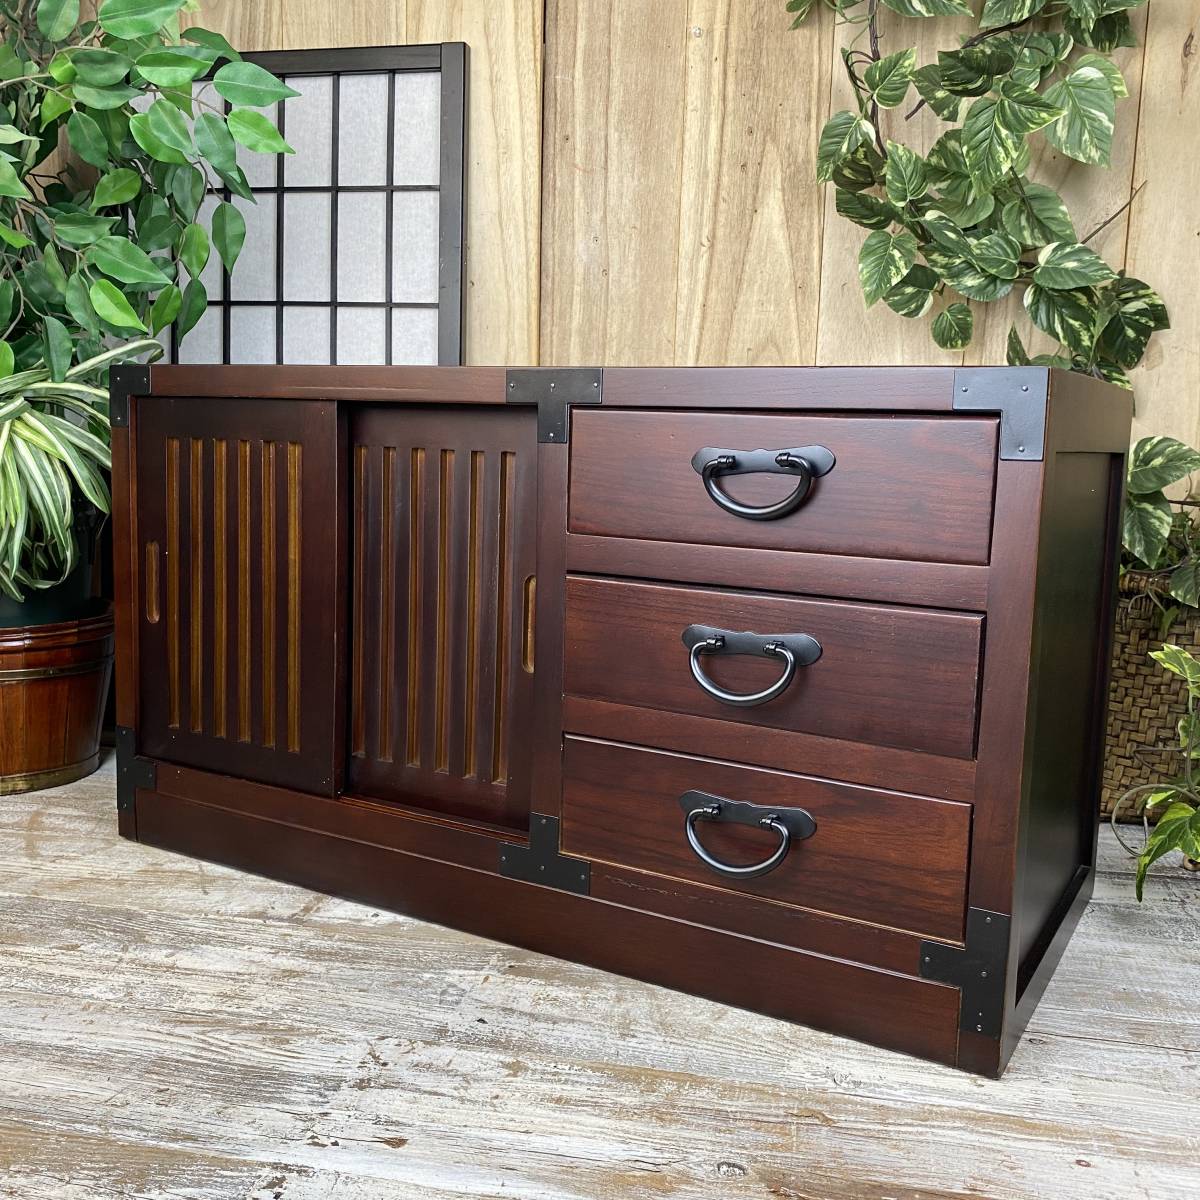  free shipping *.. furniture, peace sliding door chest, sideboard, television stand, small articles storage,. material wooden purity,TV pcs, chest of drawers, many drawer, chest, ornament pcs 